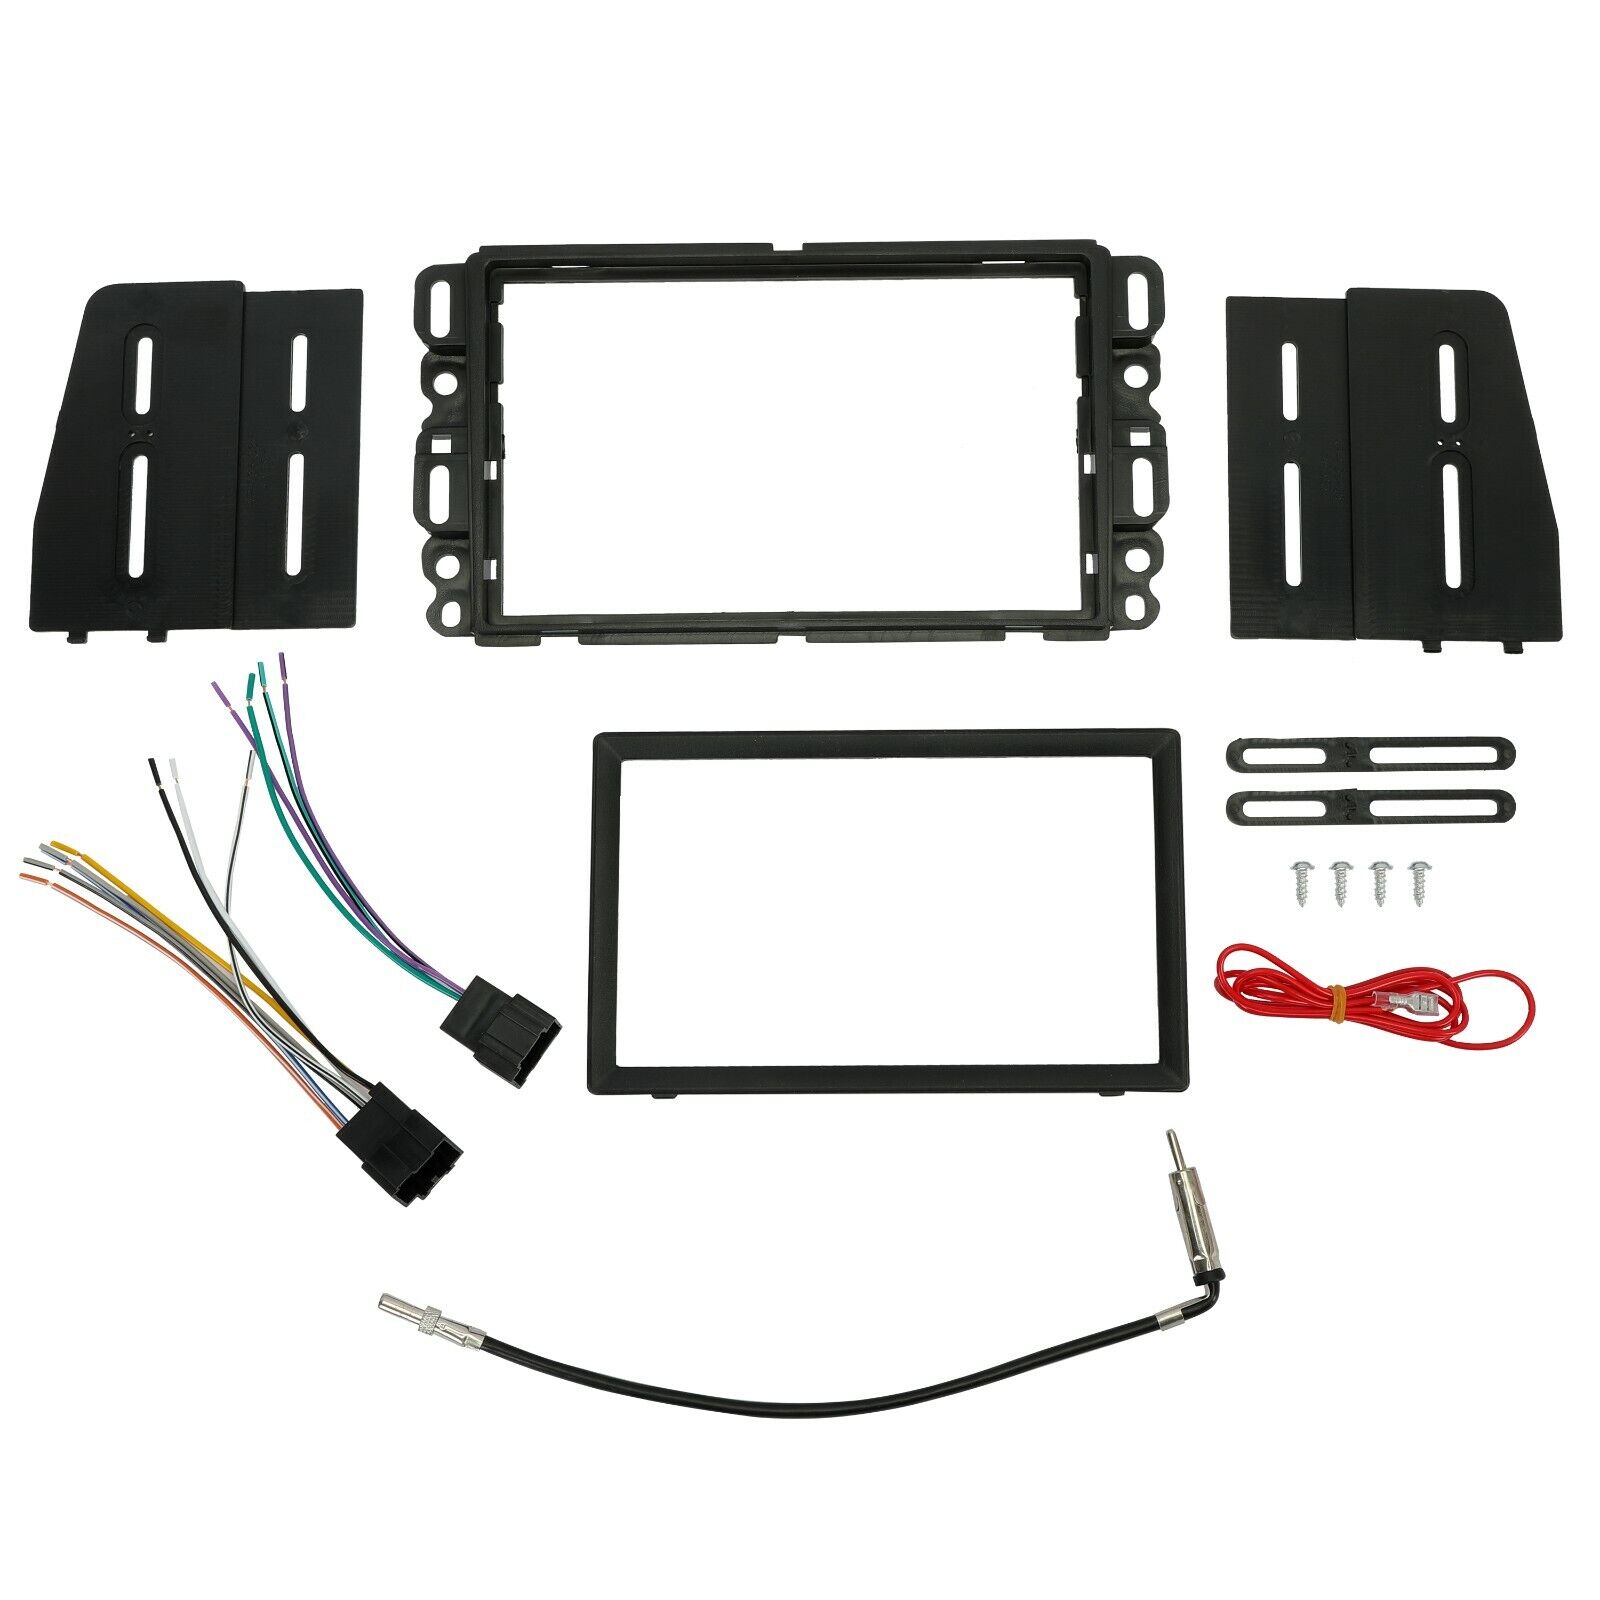 Double Din Dash Kit Stereo Radio Installation Install Kit w Wire Harness Antenna